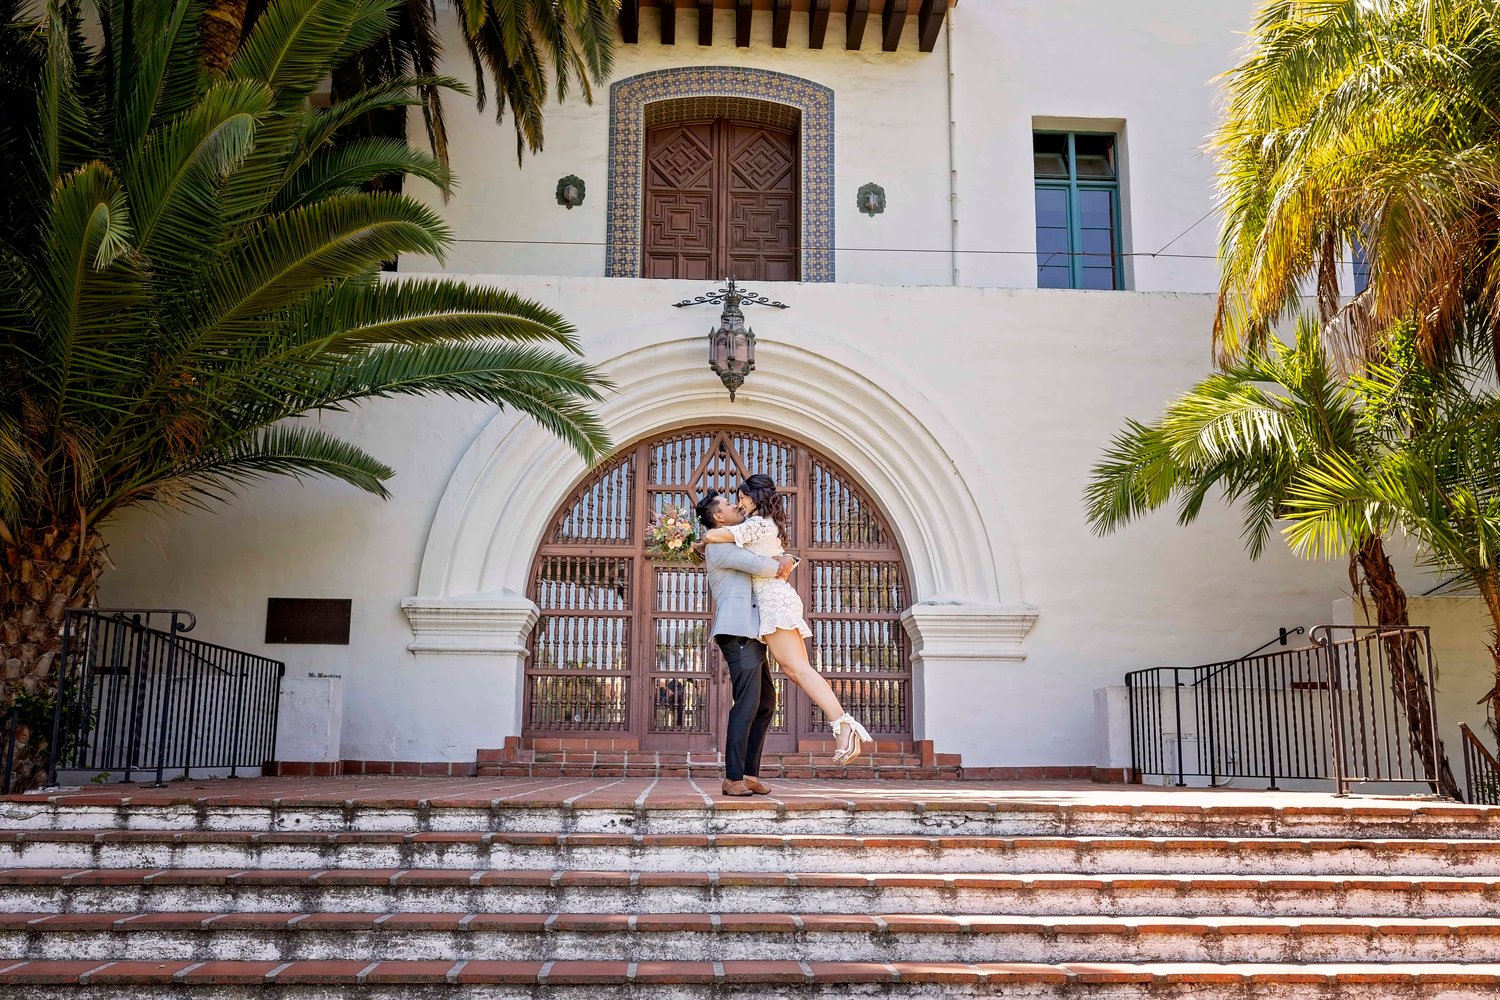 groom lifting the bride in front of an arched doorway at the Santa Barbara Courthouse